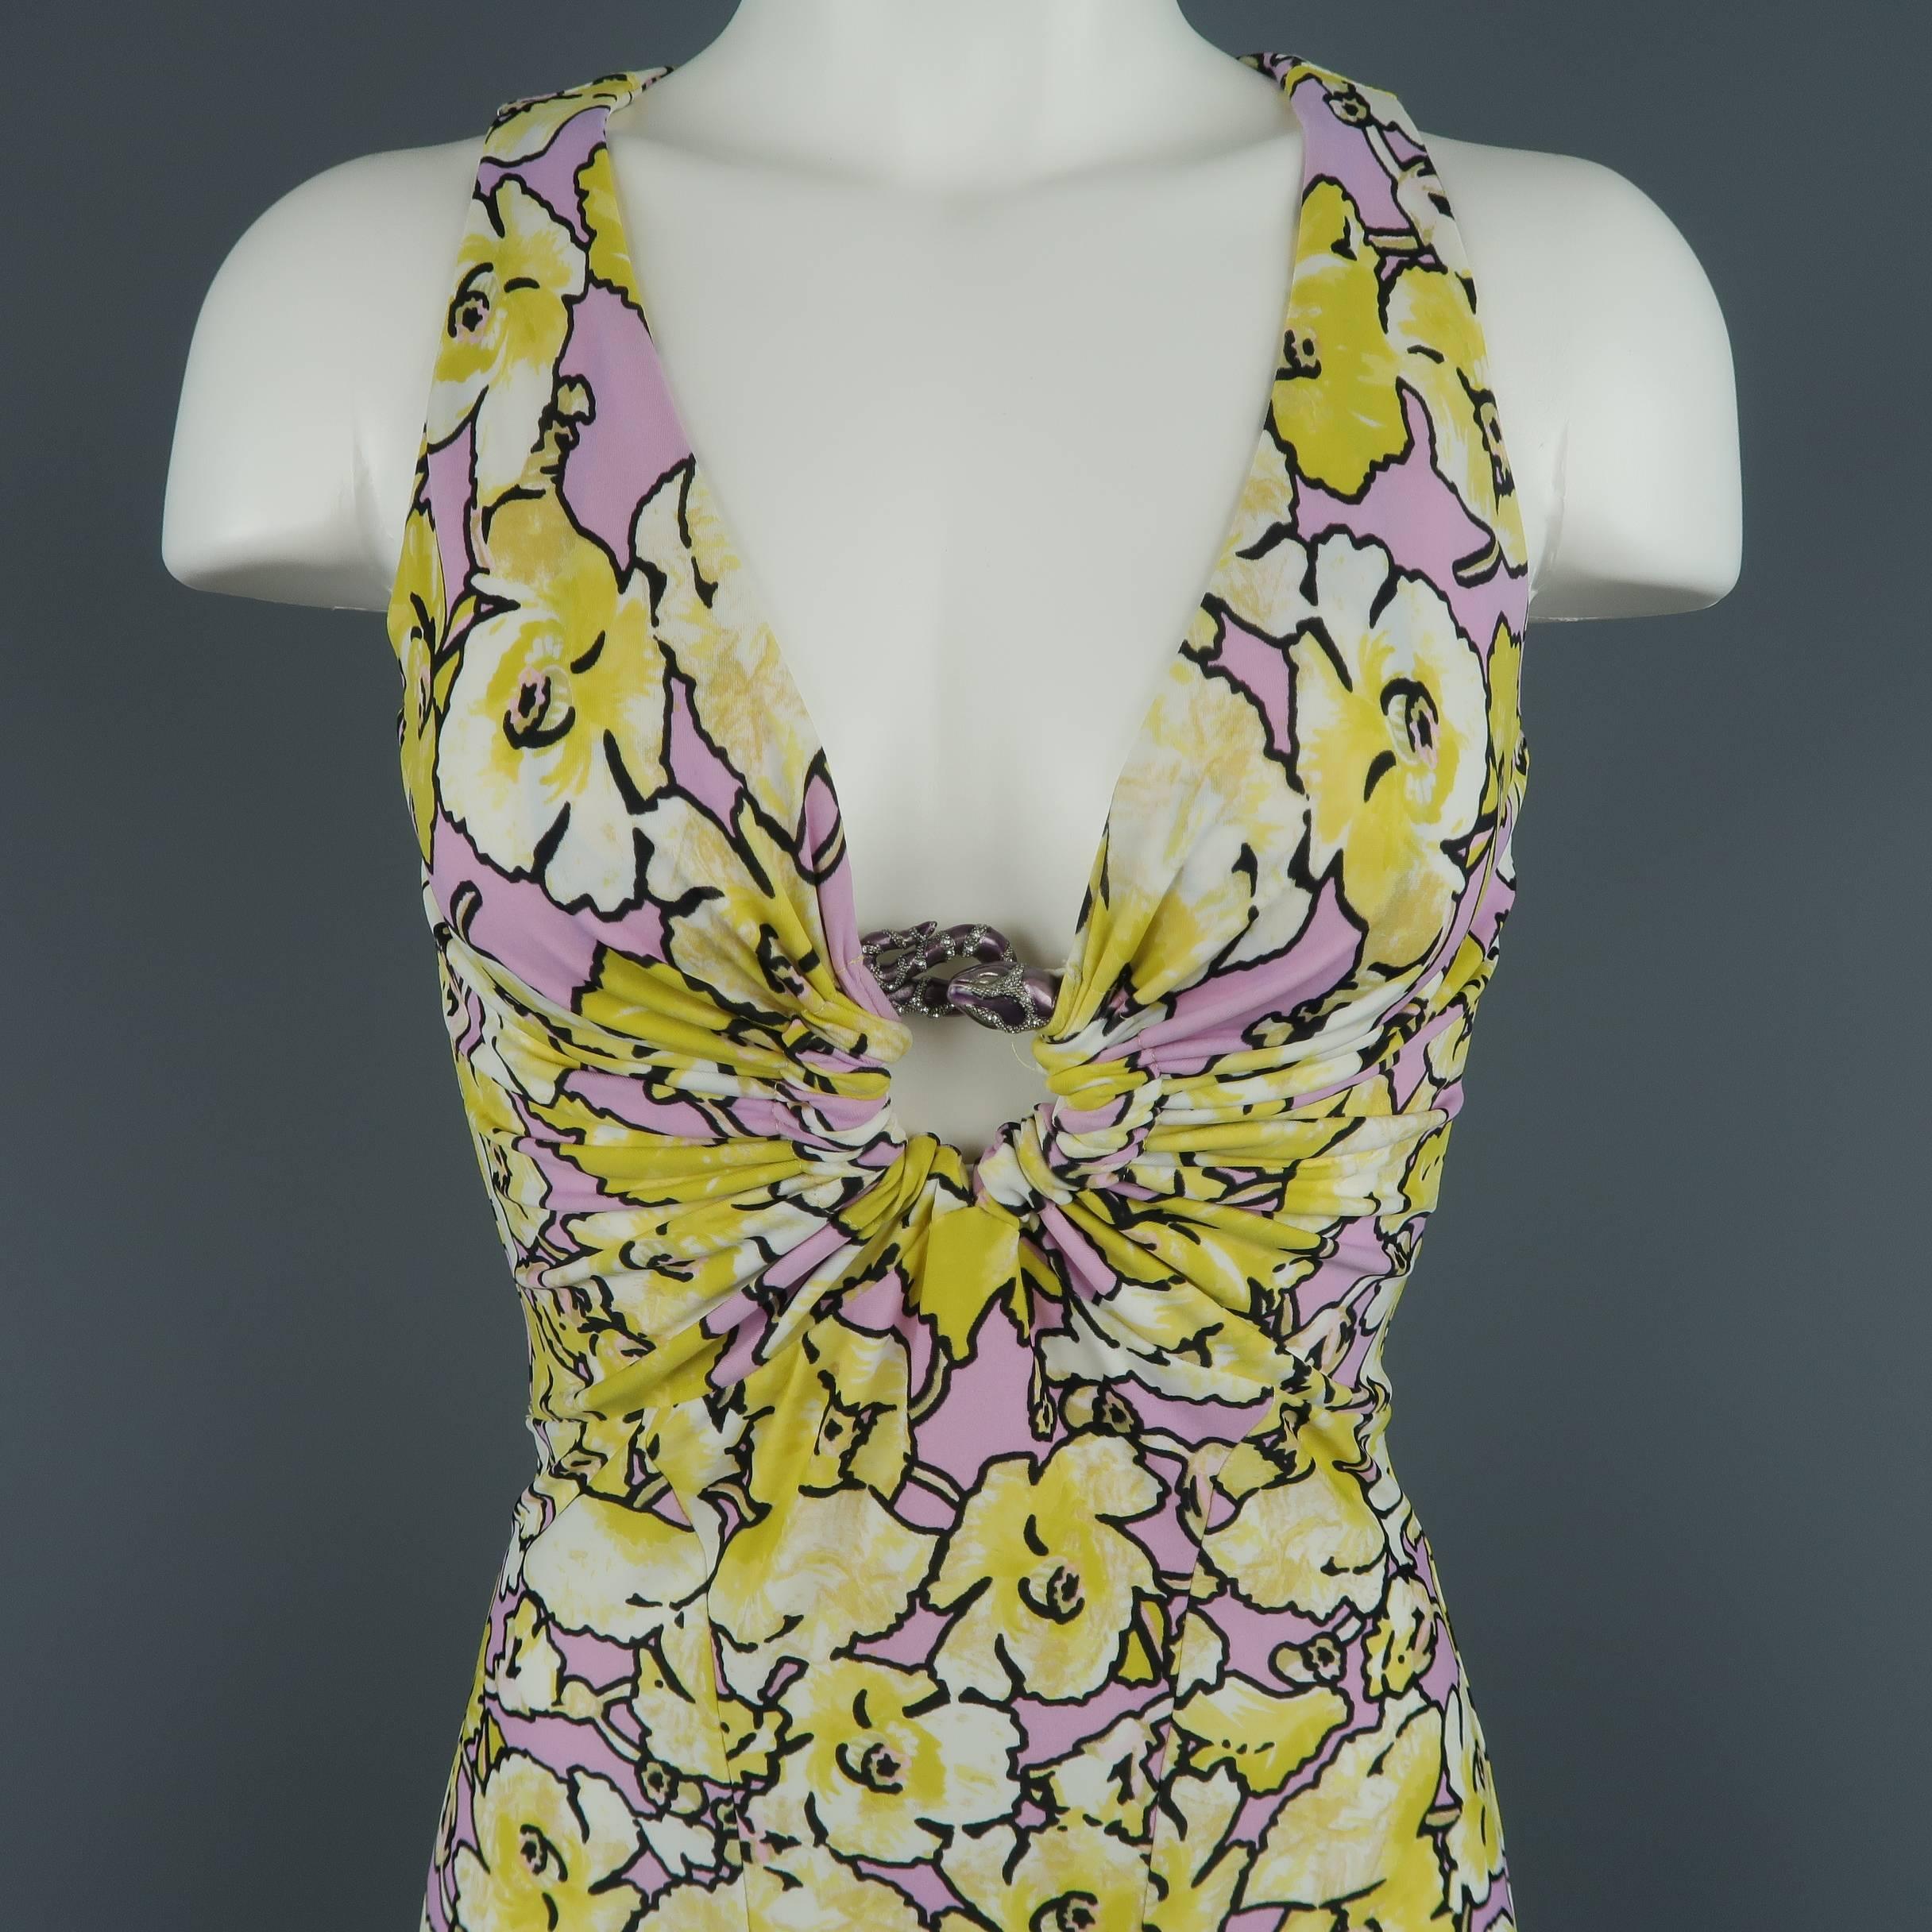 La Robe by ROBERTO CAVALLI dress comes in yellow and lavender floral print stretch jersey with a tiger print striped hem, A line skirt, and gathered bust with metal snake hoop. Made in Italy.

Excellent Pre-Owned Condition.
Marked: IT 42
